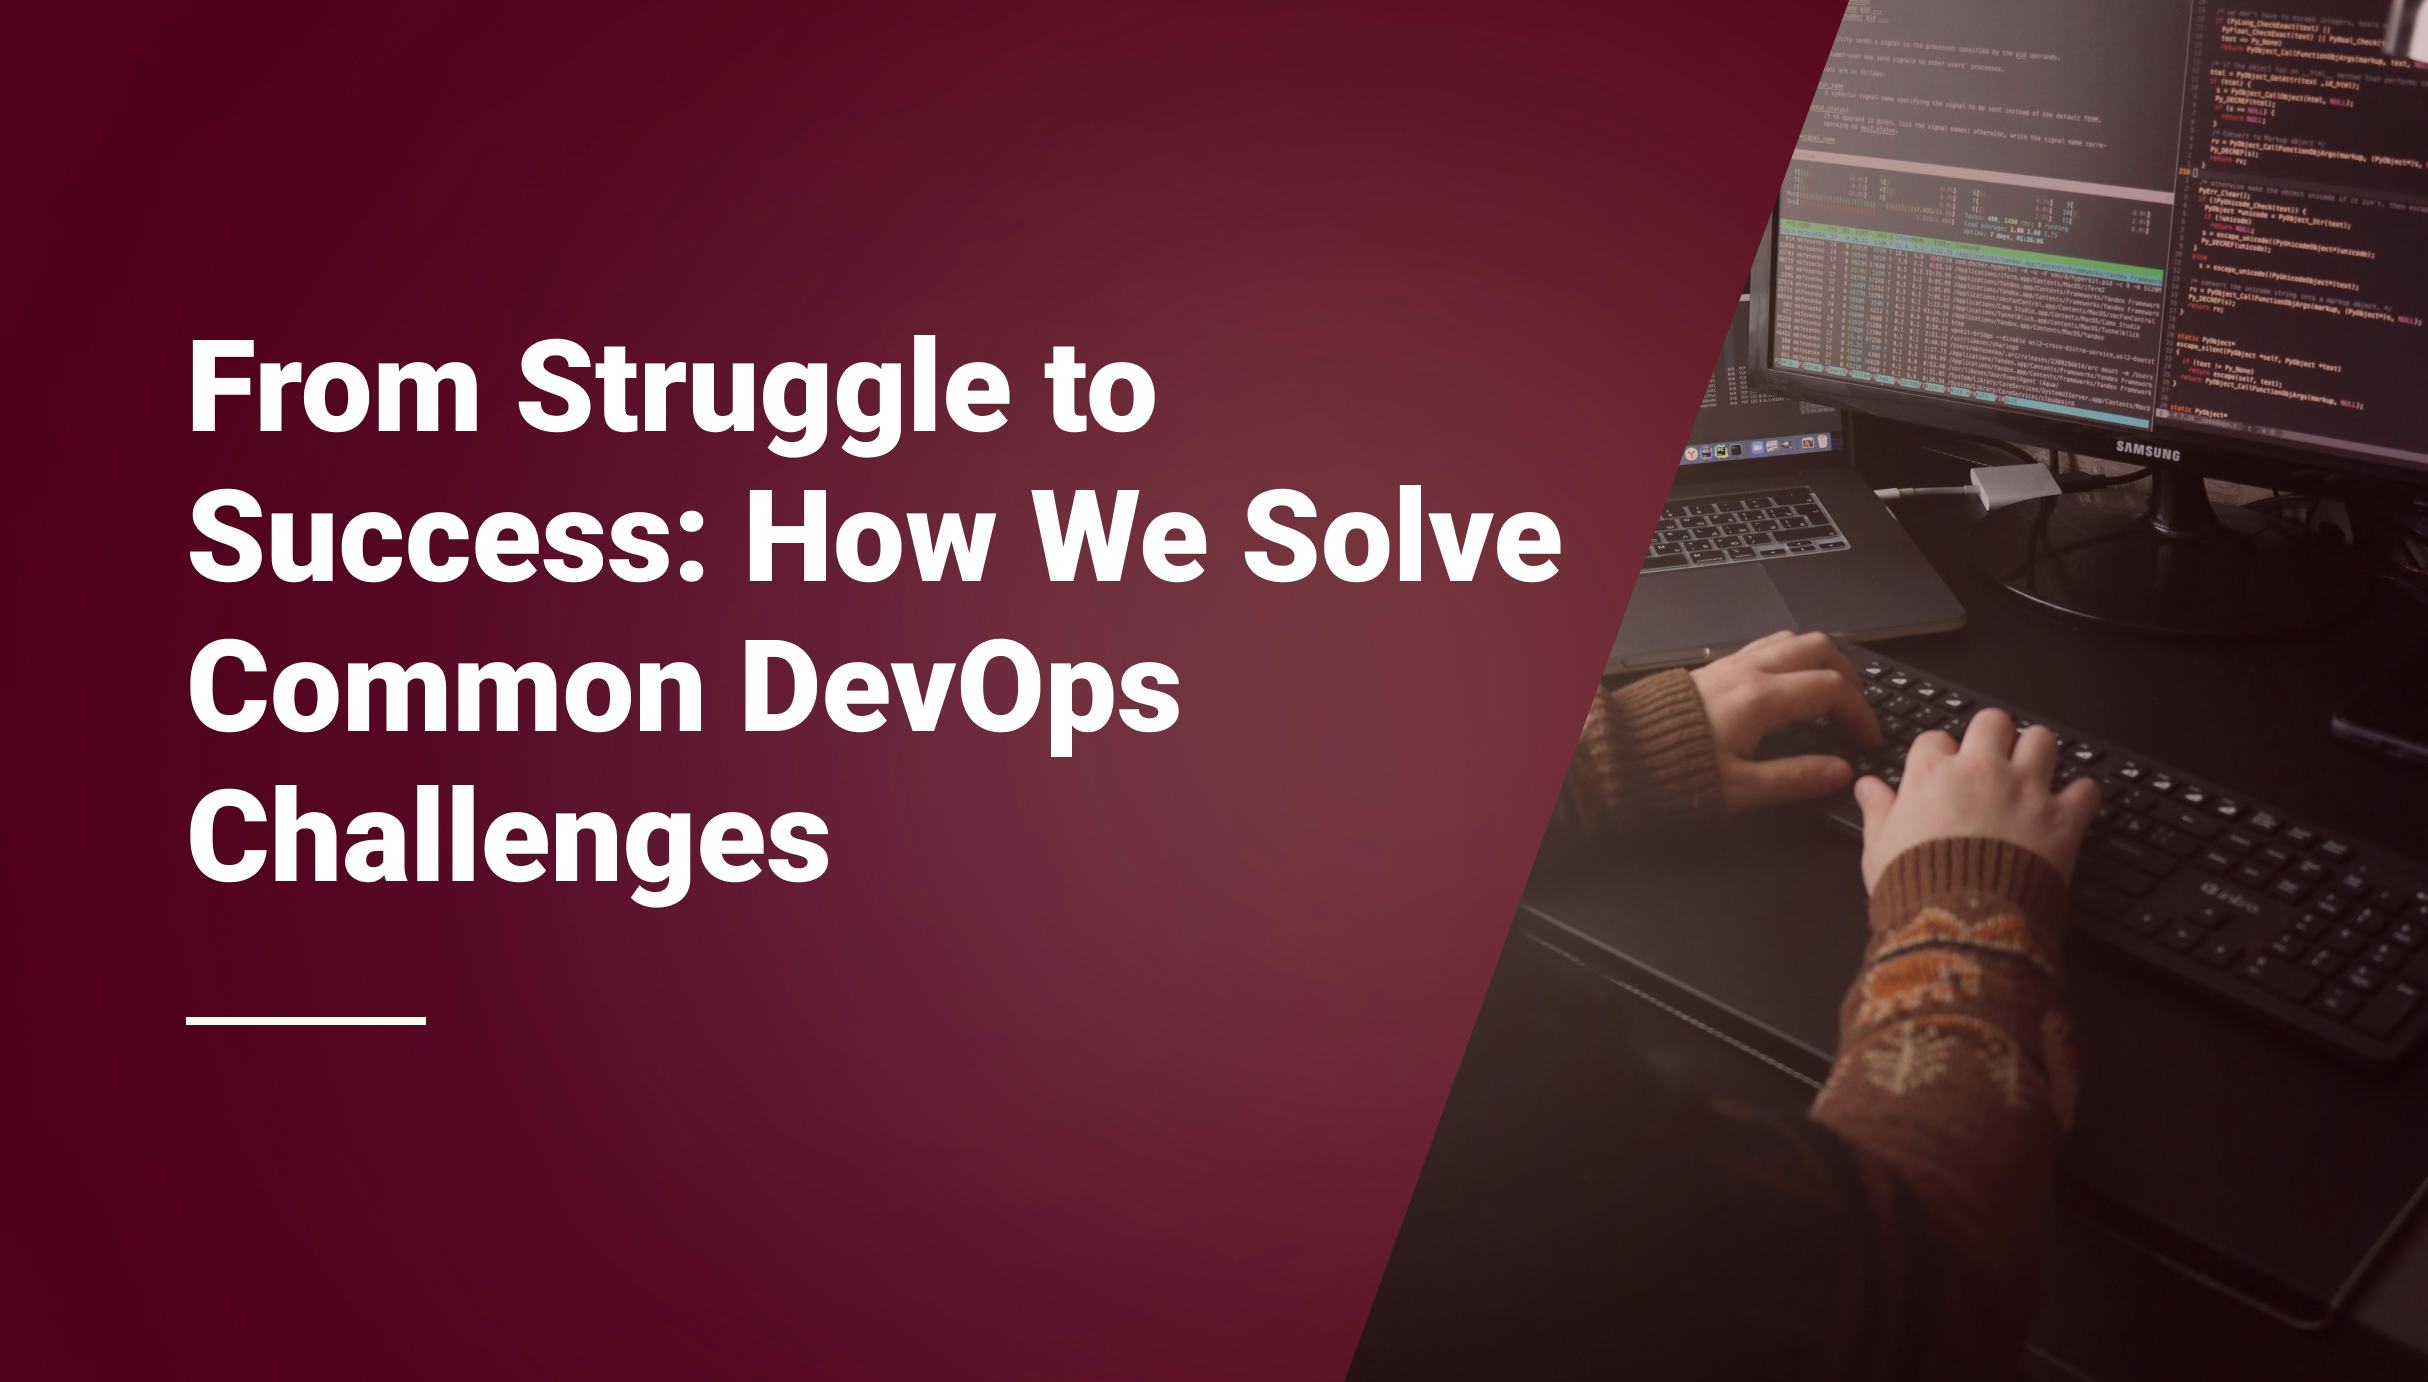 From Struggle to Success: How We Solve Common DevOps Challenges